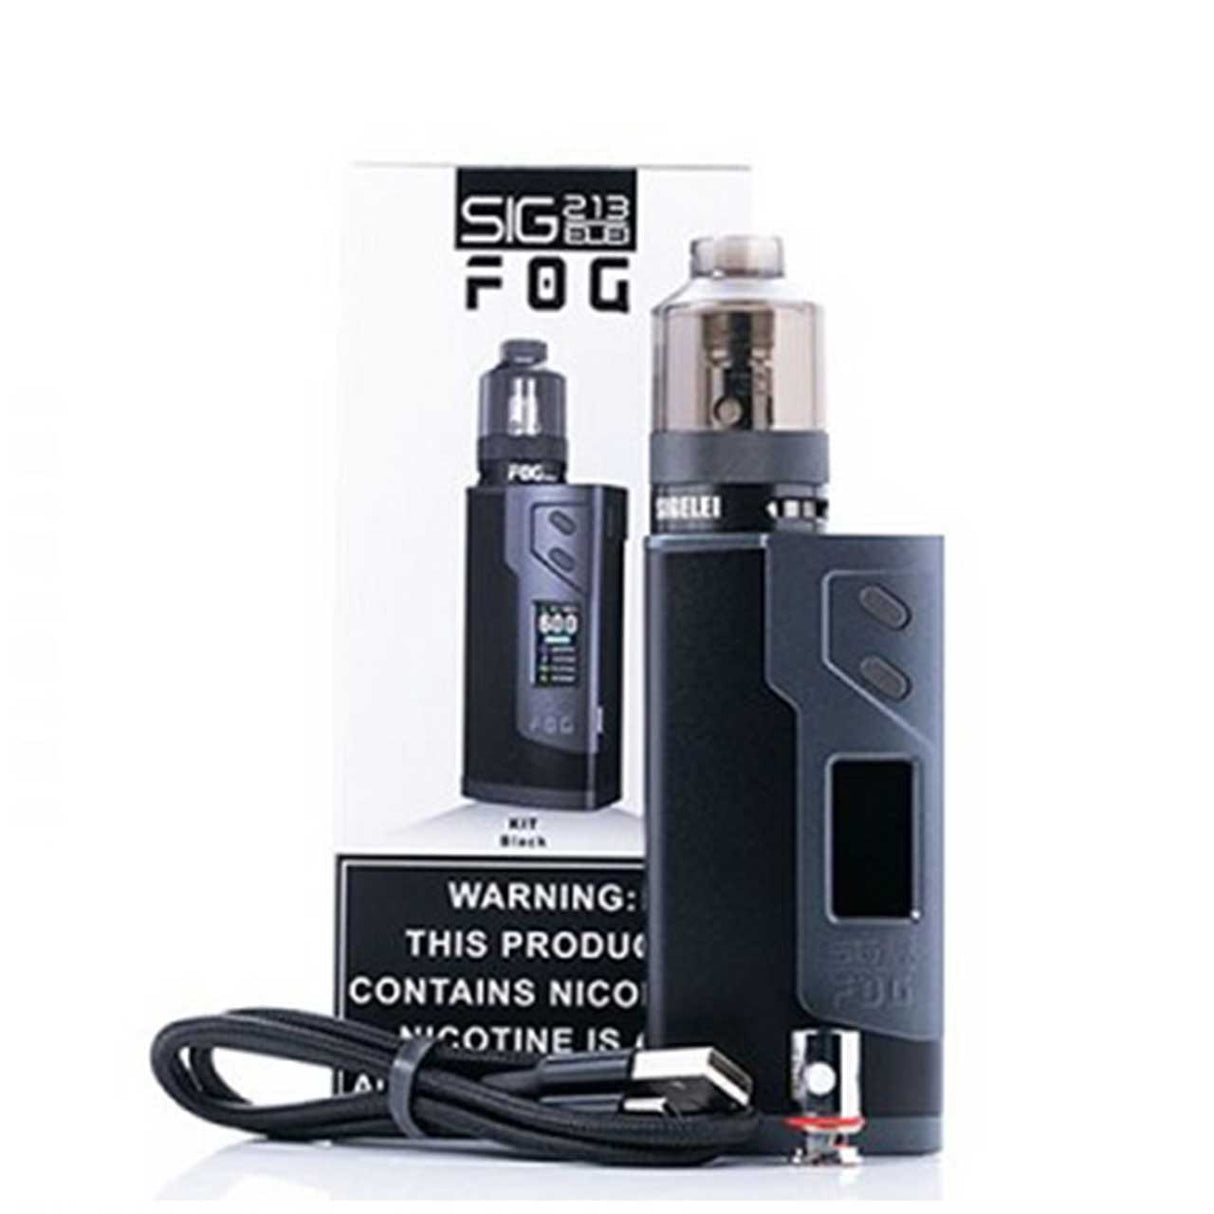 Sigelei 213w FOG Starter Vaping Kit with Black Zinc Alloy Body and Rubberized Black Grip Packaging